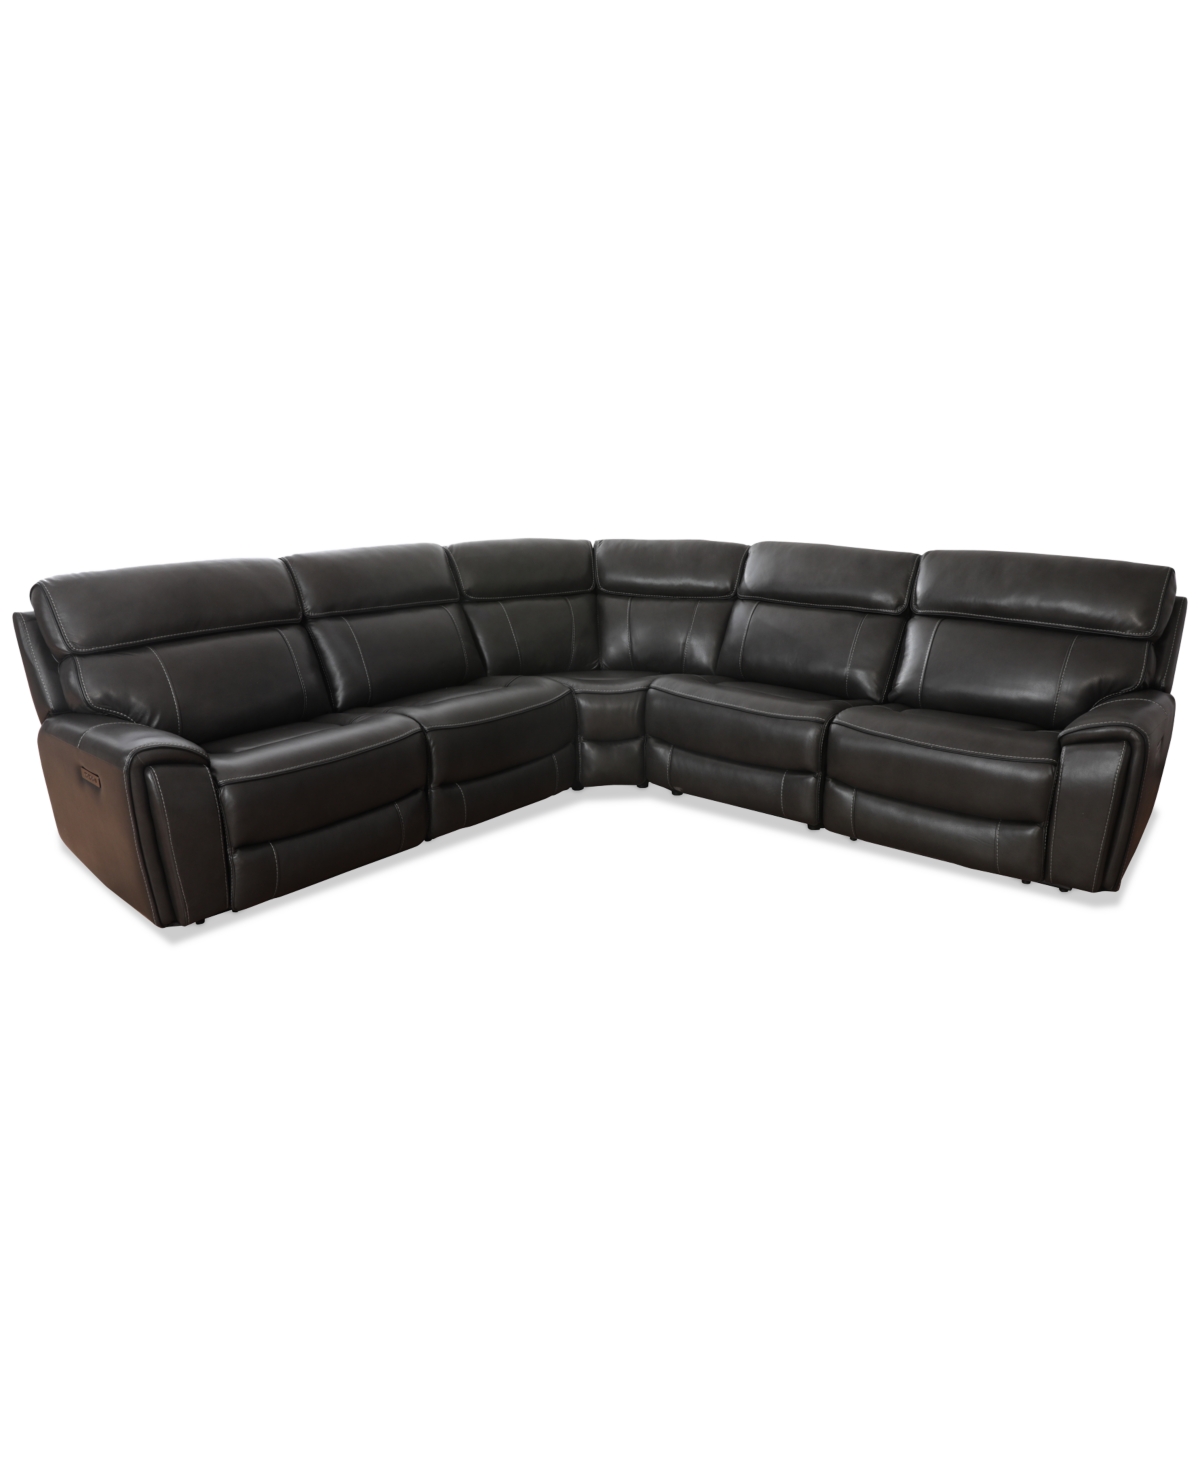 Macy's Hutchenson 119.5" 5-pc. Zero Gravity Leather Sectional With 2 Power Recliners, Created For  In Coffee